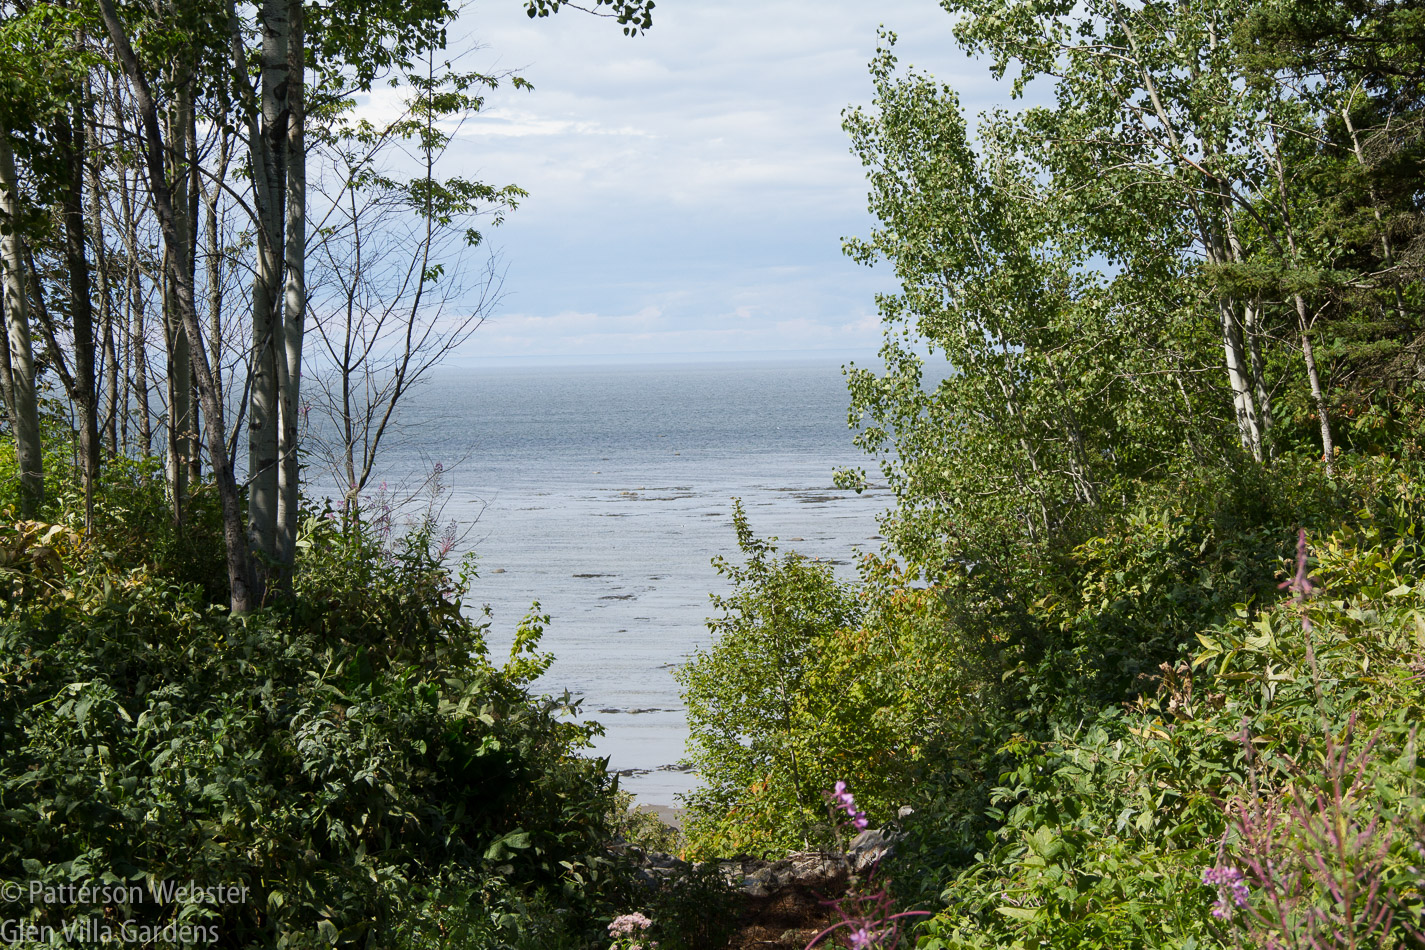 The festival installations are adjacent to the St. Lawrence River. 